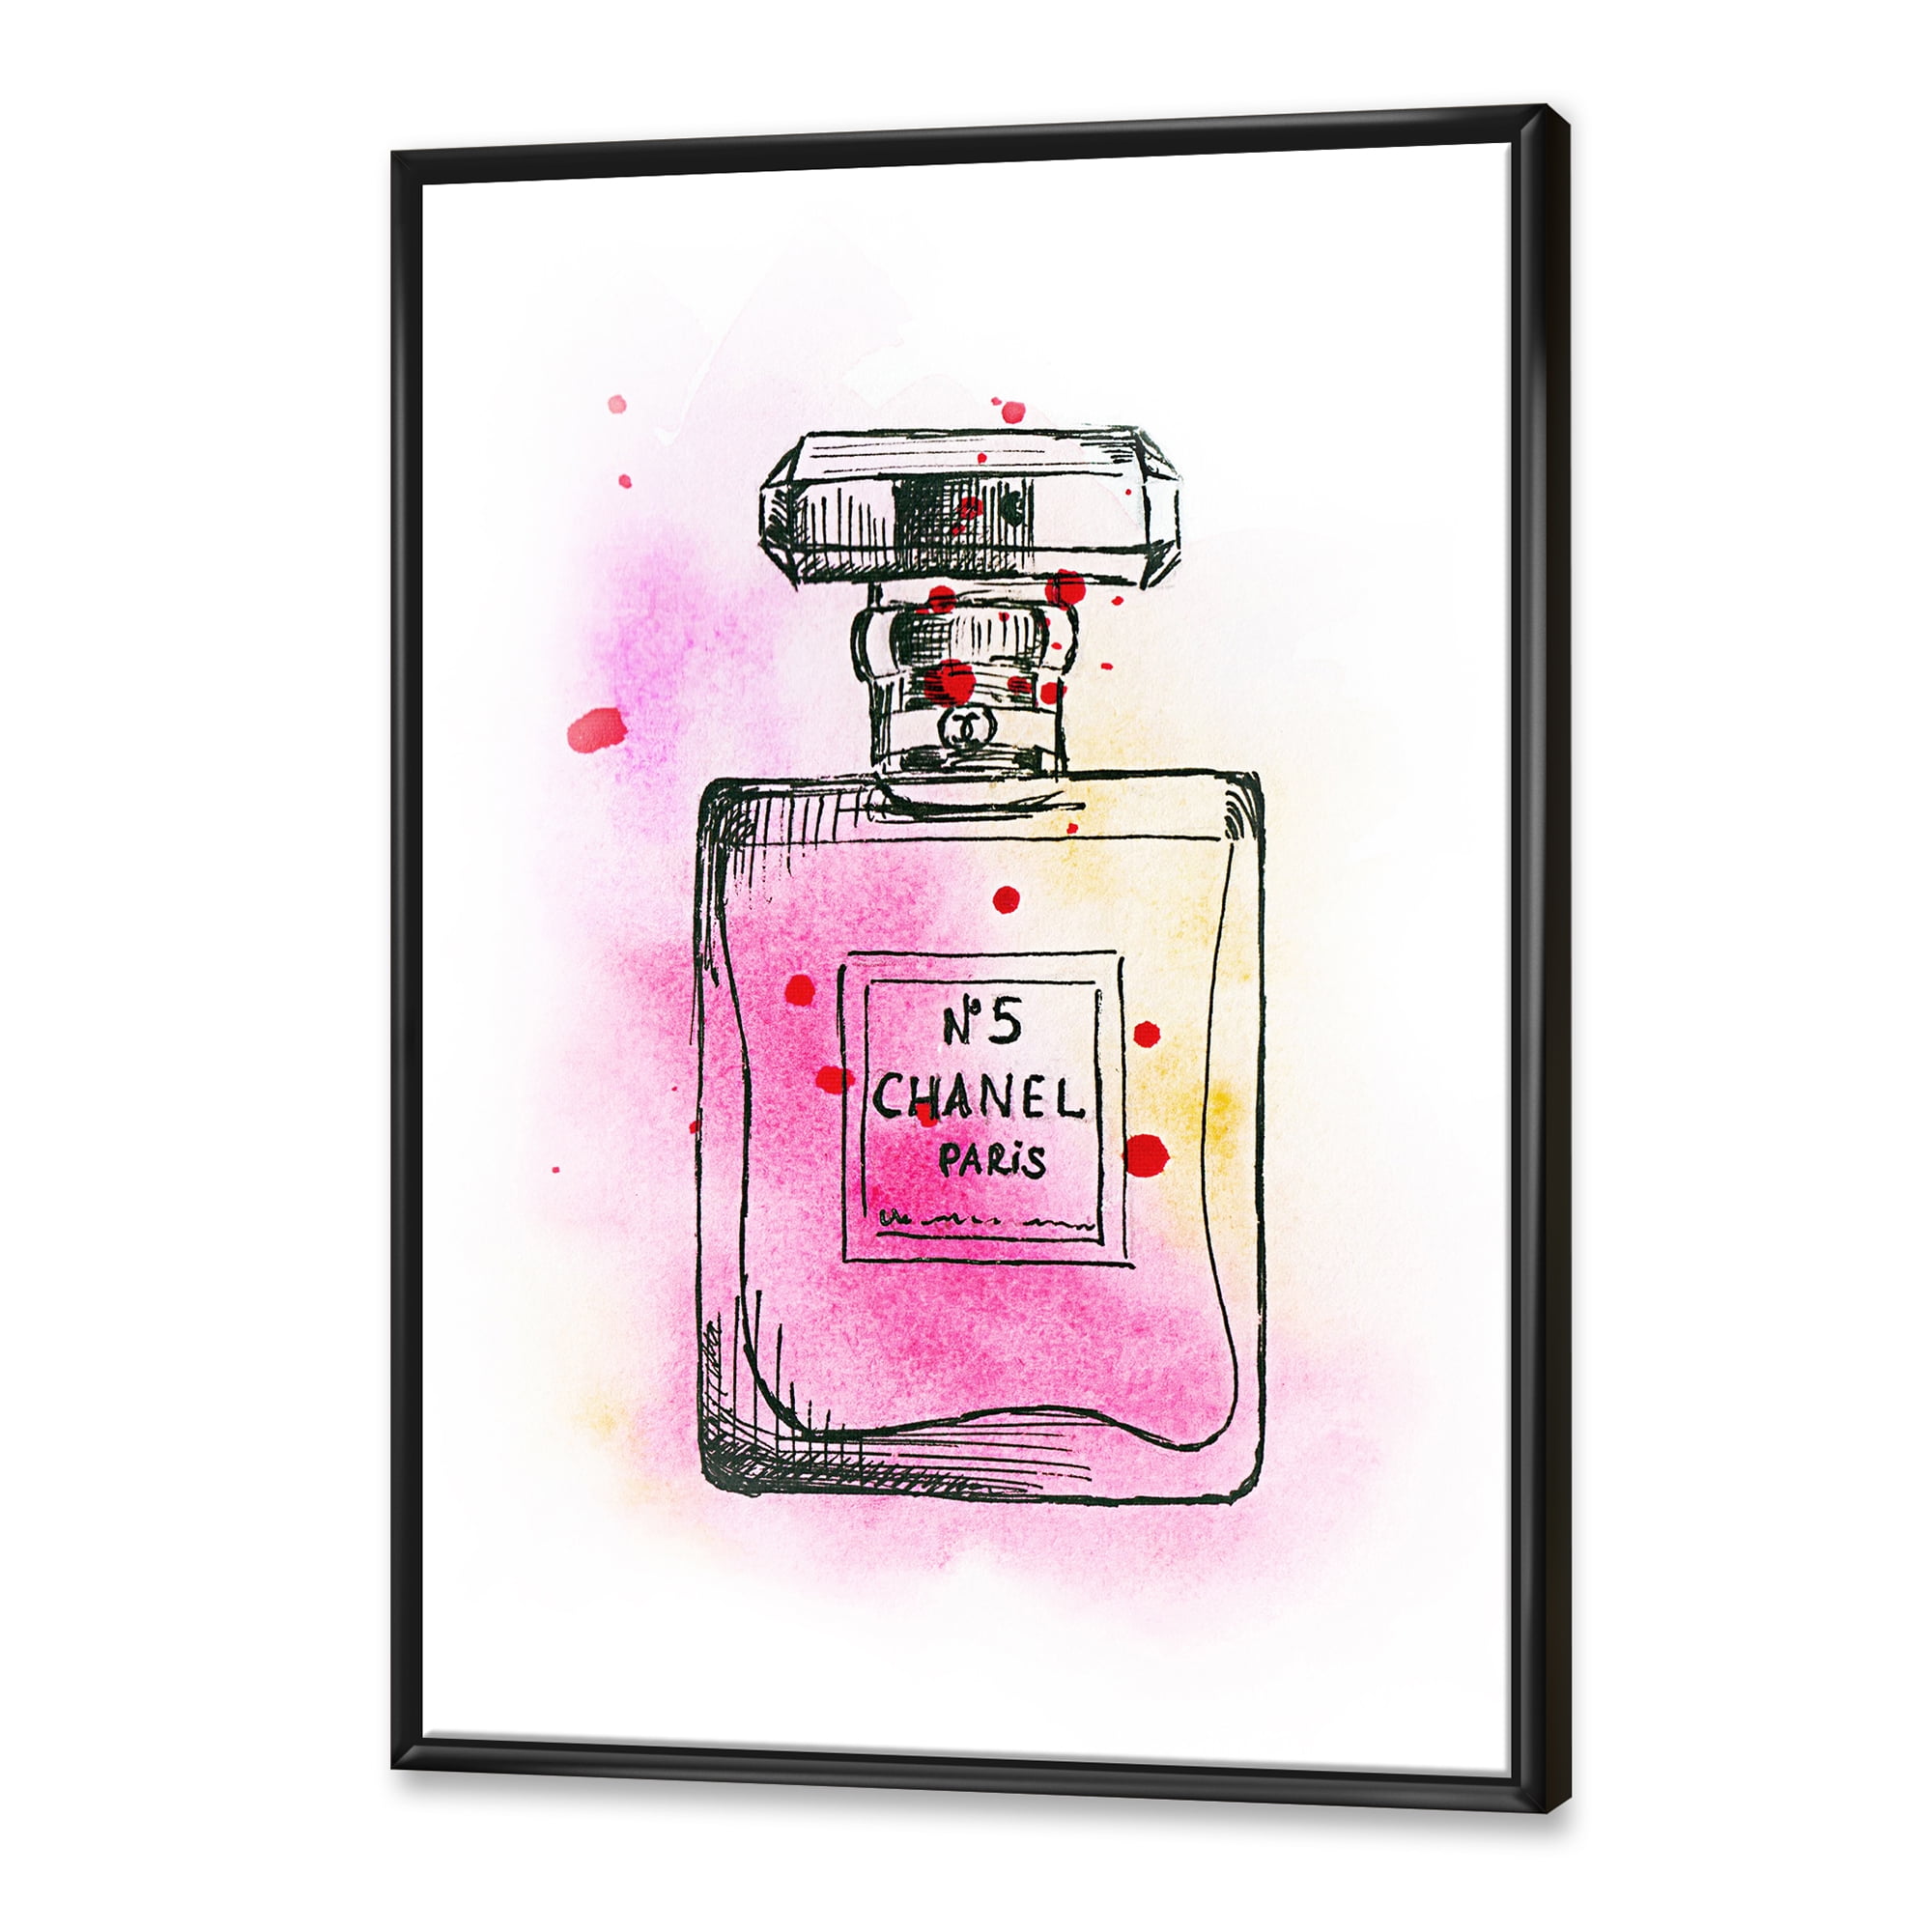 Perfume Chanel Five Pink Strokes 24 in x 32 in Framed Painting Canvas Art  Print, by Designart